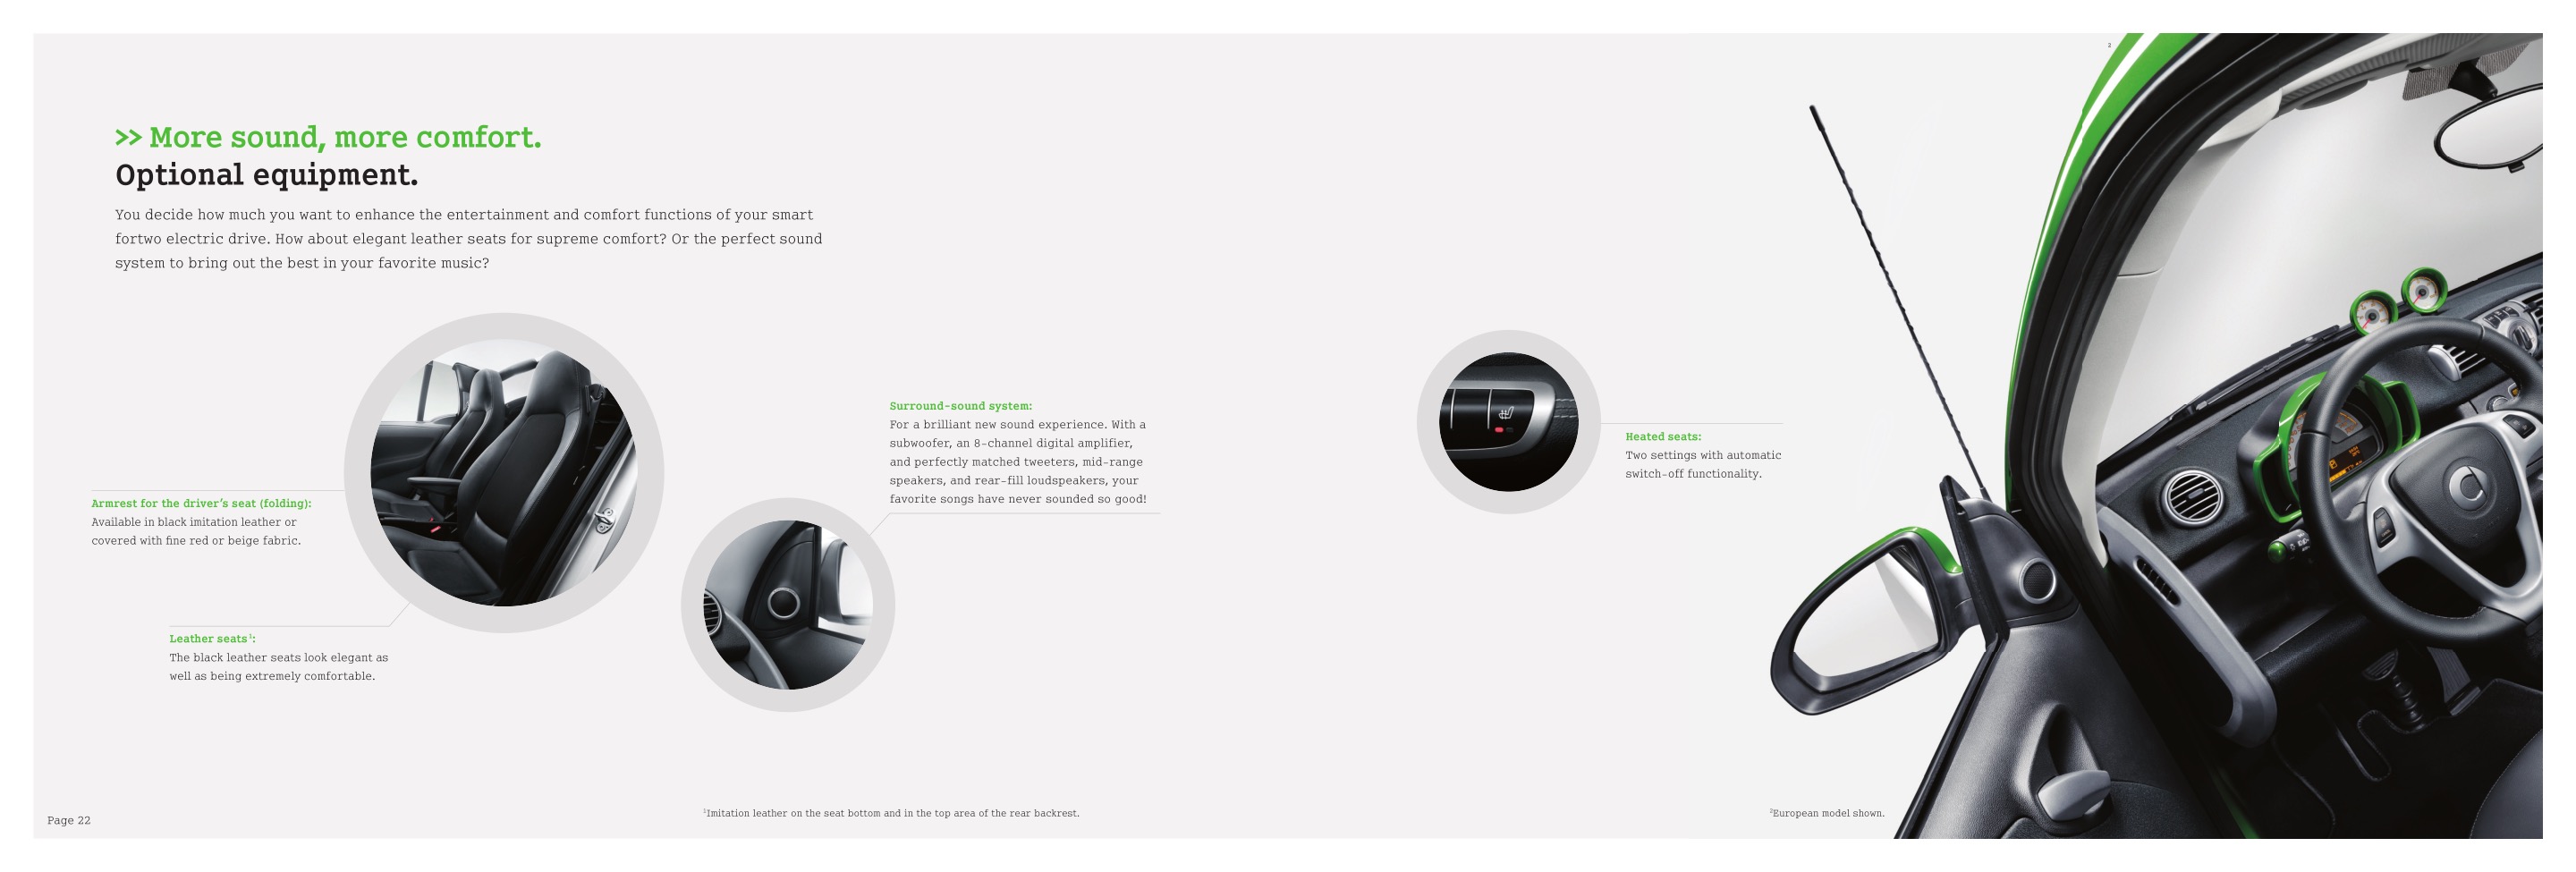 2015 Smart Fortwo Electric Brochure Page 1